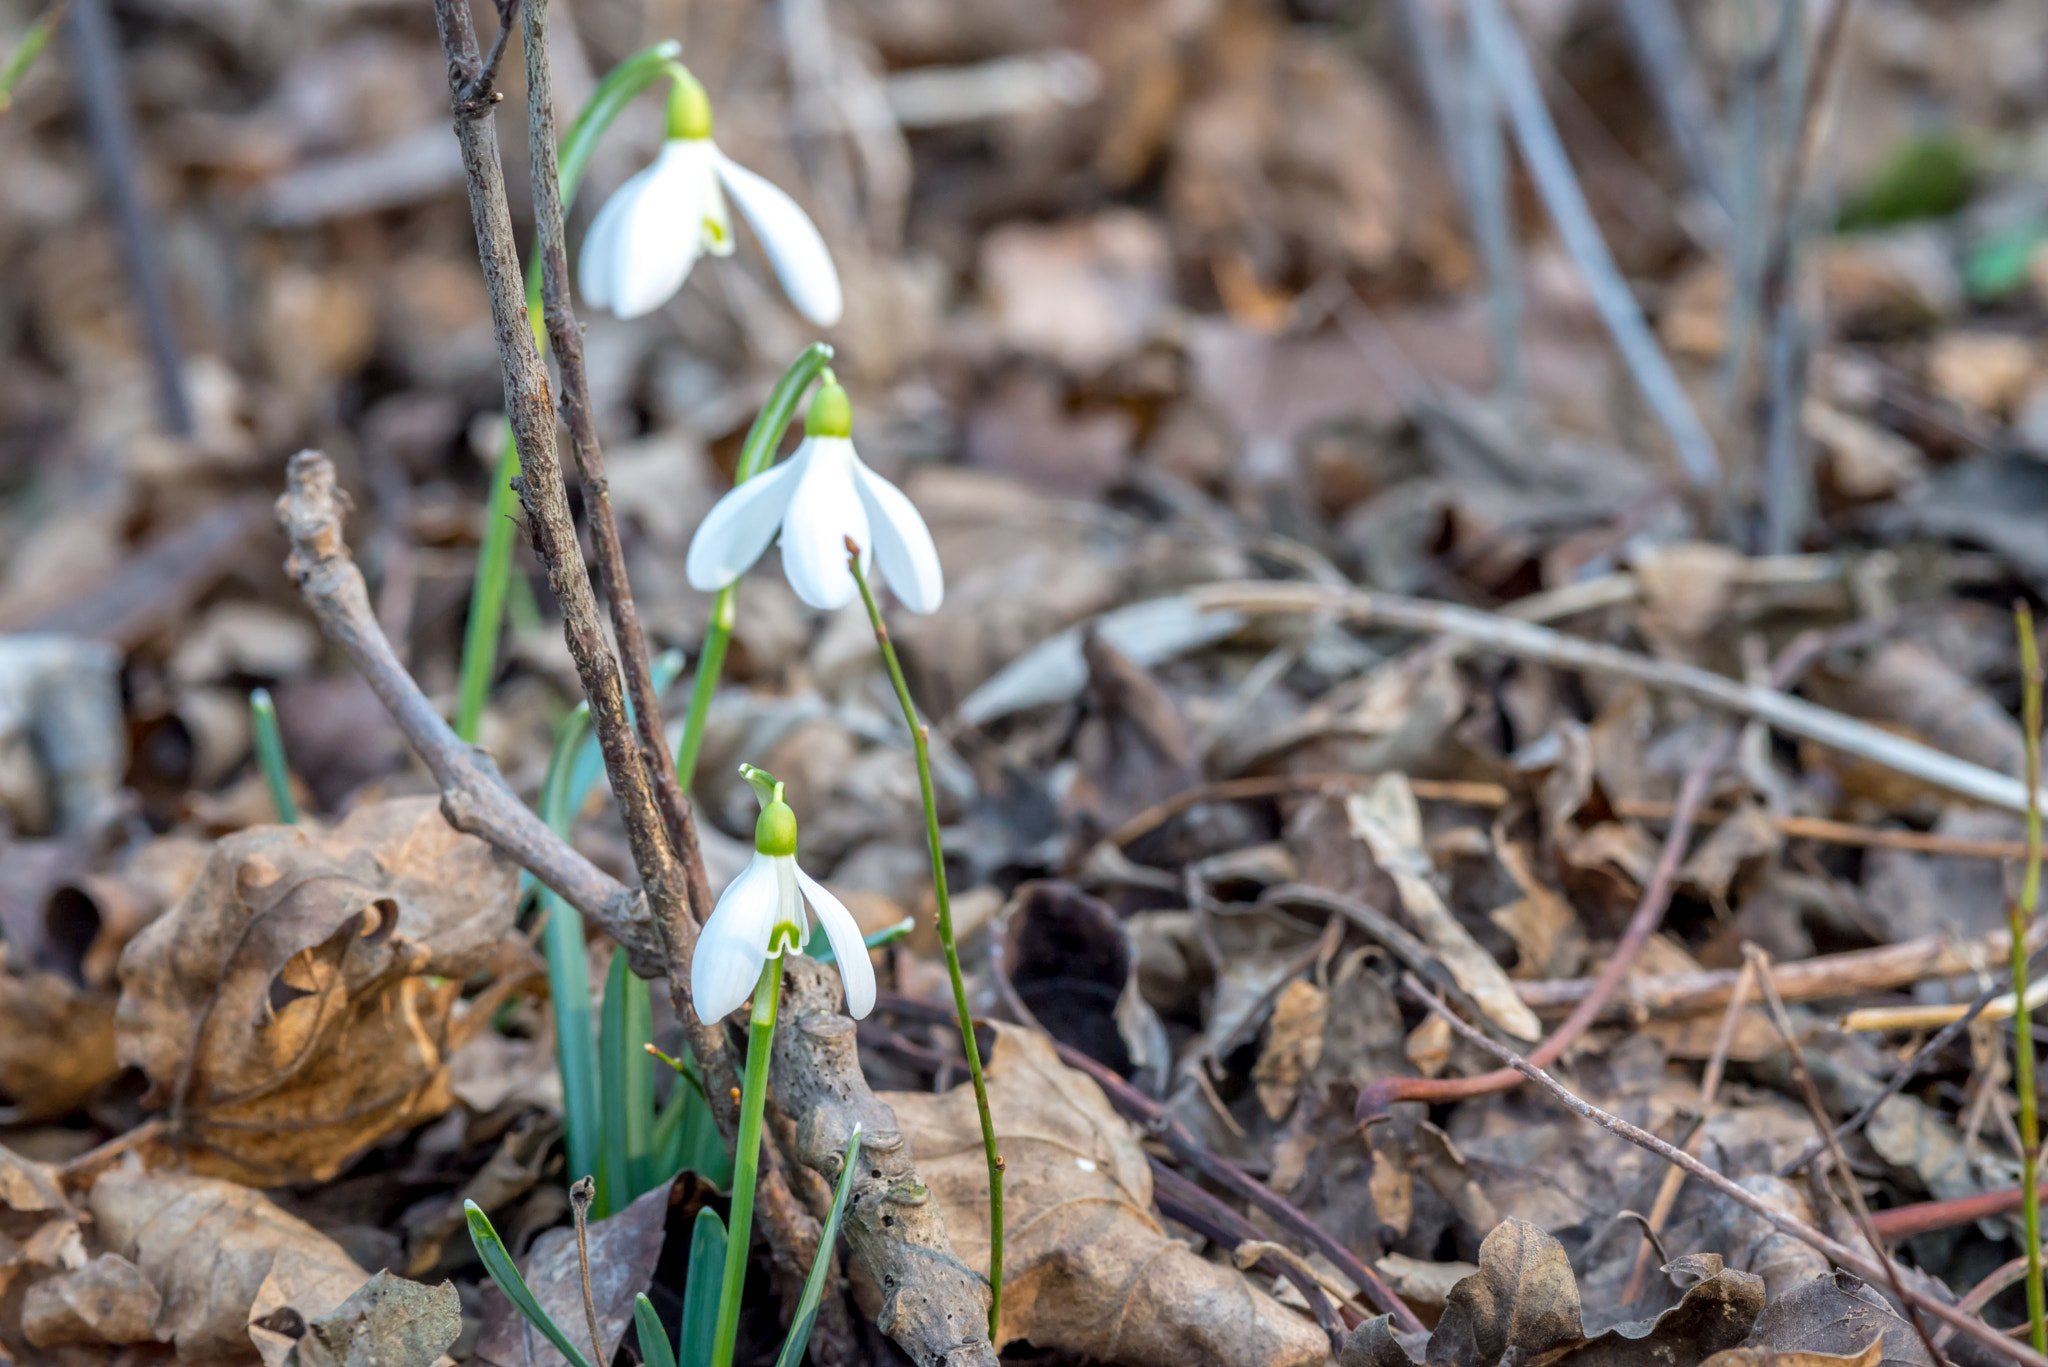 AF Micro-Nikkor 105mm f/2.8 sample photo. Early snowdrops in forest early spring, march photography